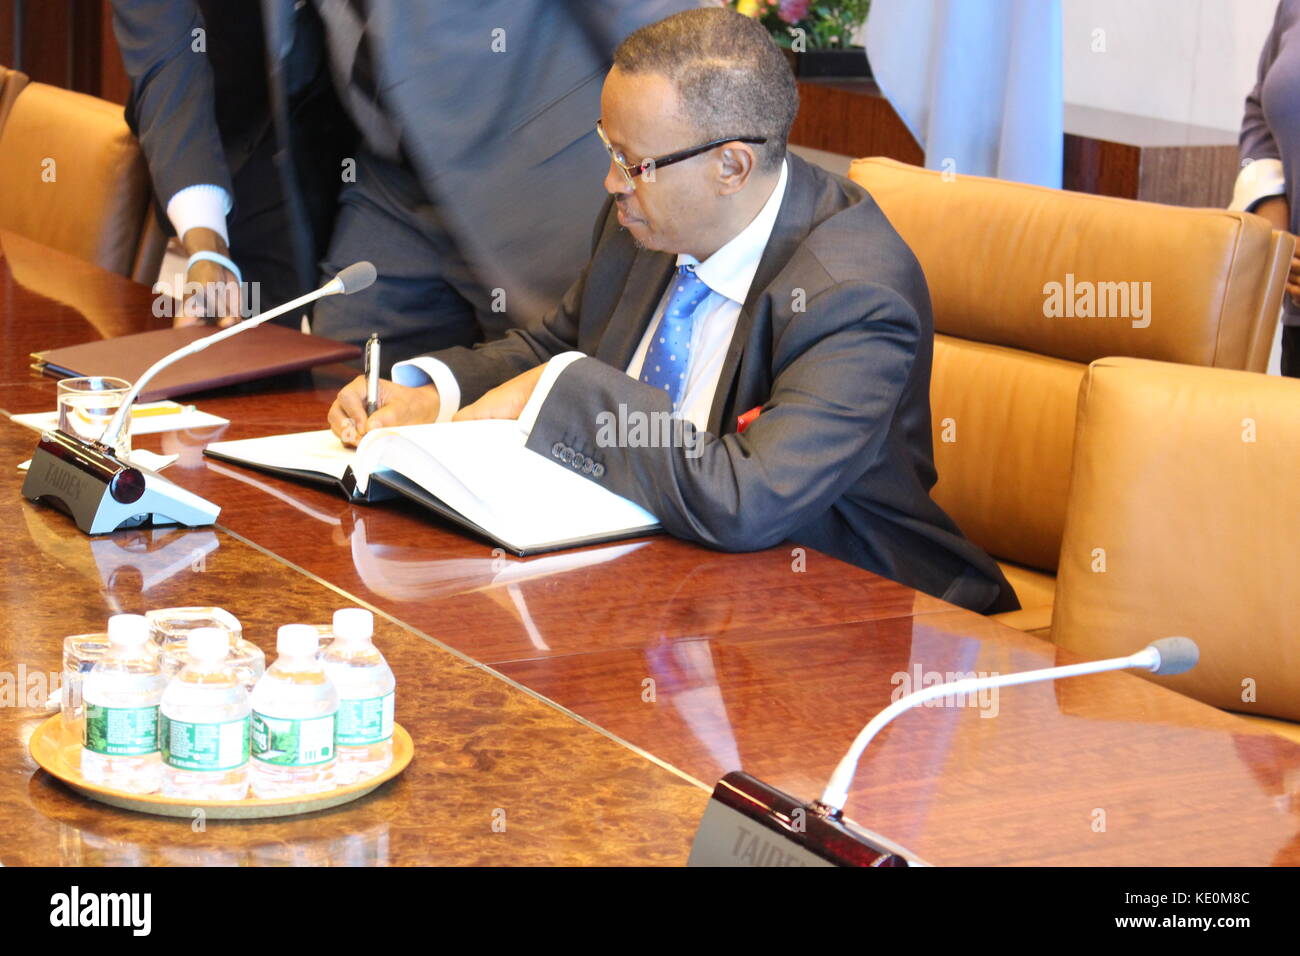 UN, New York, USA.17th Oct, 2017. Somalia's Minister of State Abdullahi Hamud Mohamed met UN Sec-Gen Antonio Guterres after the deadly bombing in Mogadishu. Photo: Matthew Russell Lee / Inner City Press Credit: Matthew Russell Lee/Alamy Live News Stock Photo